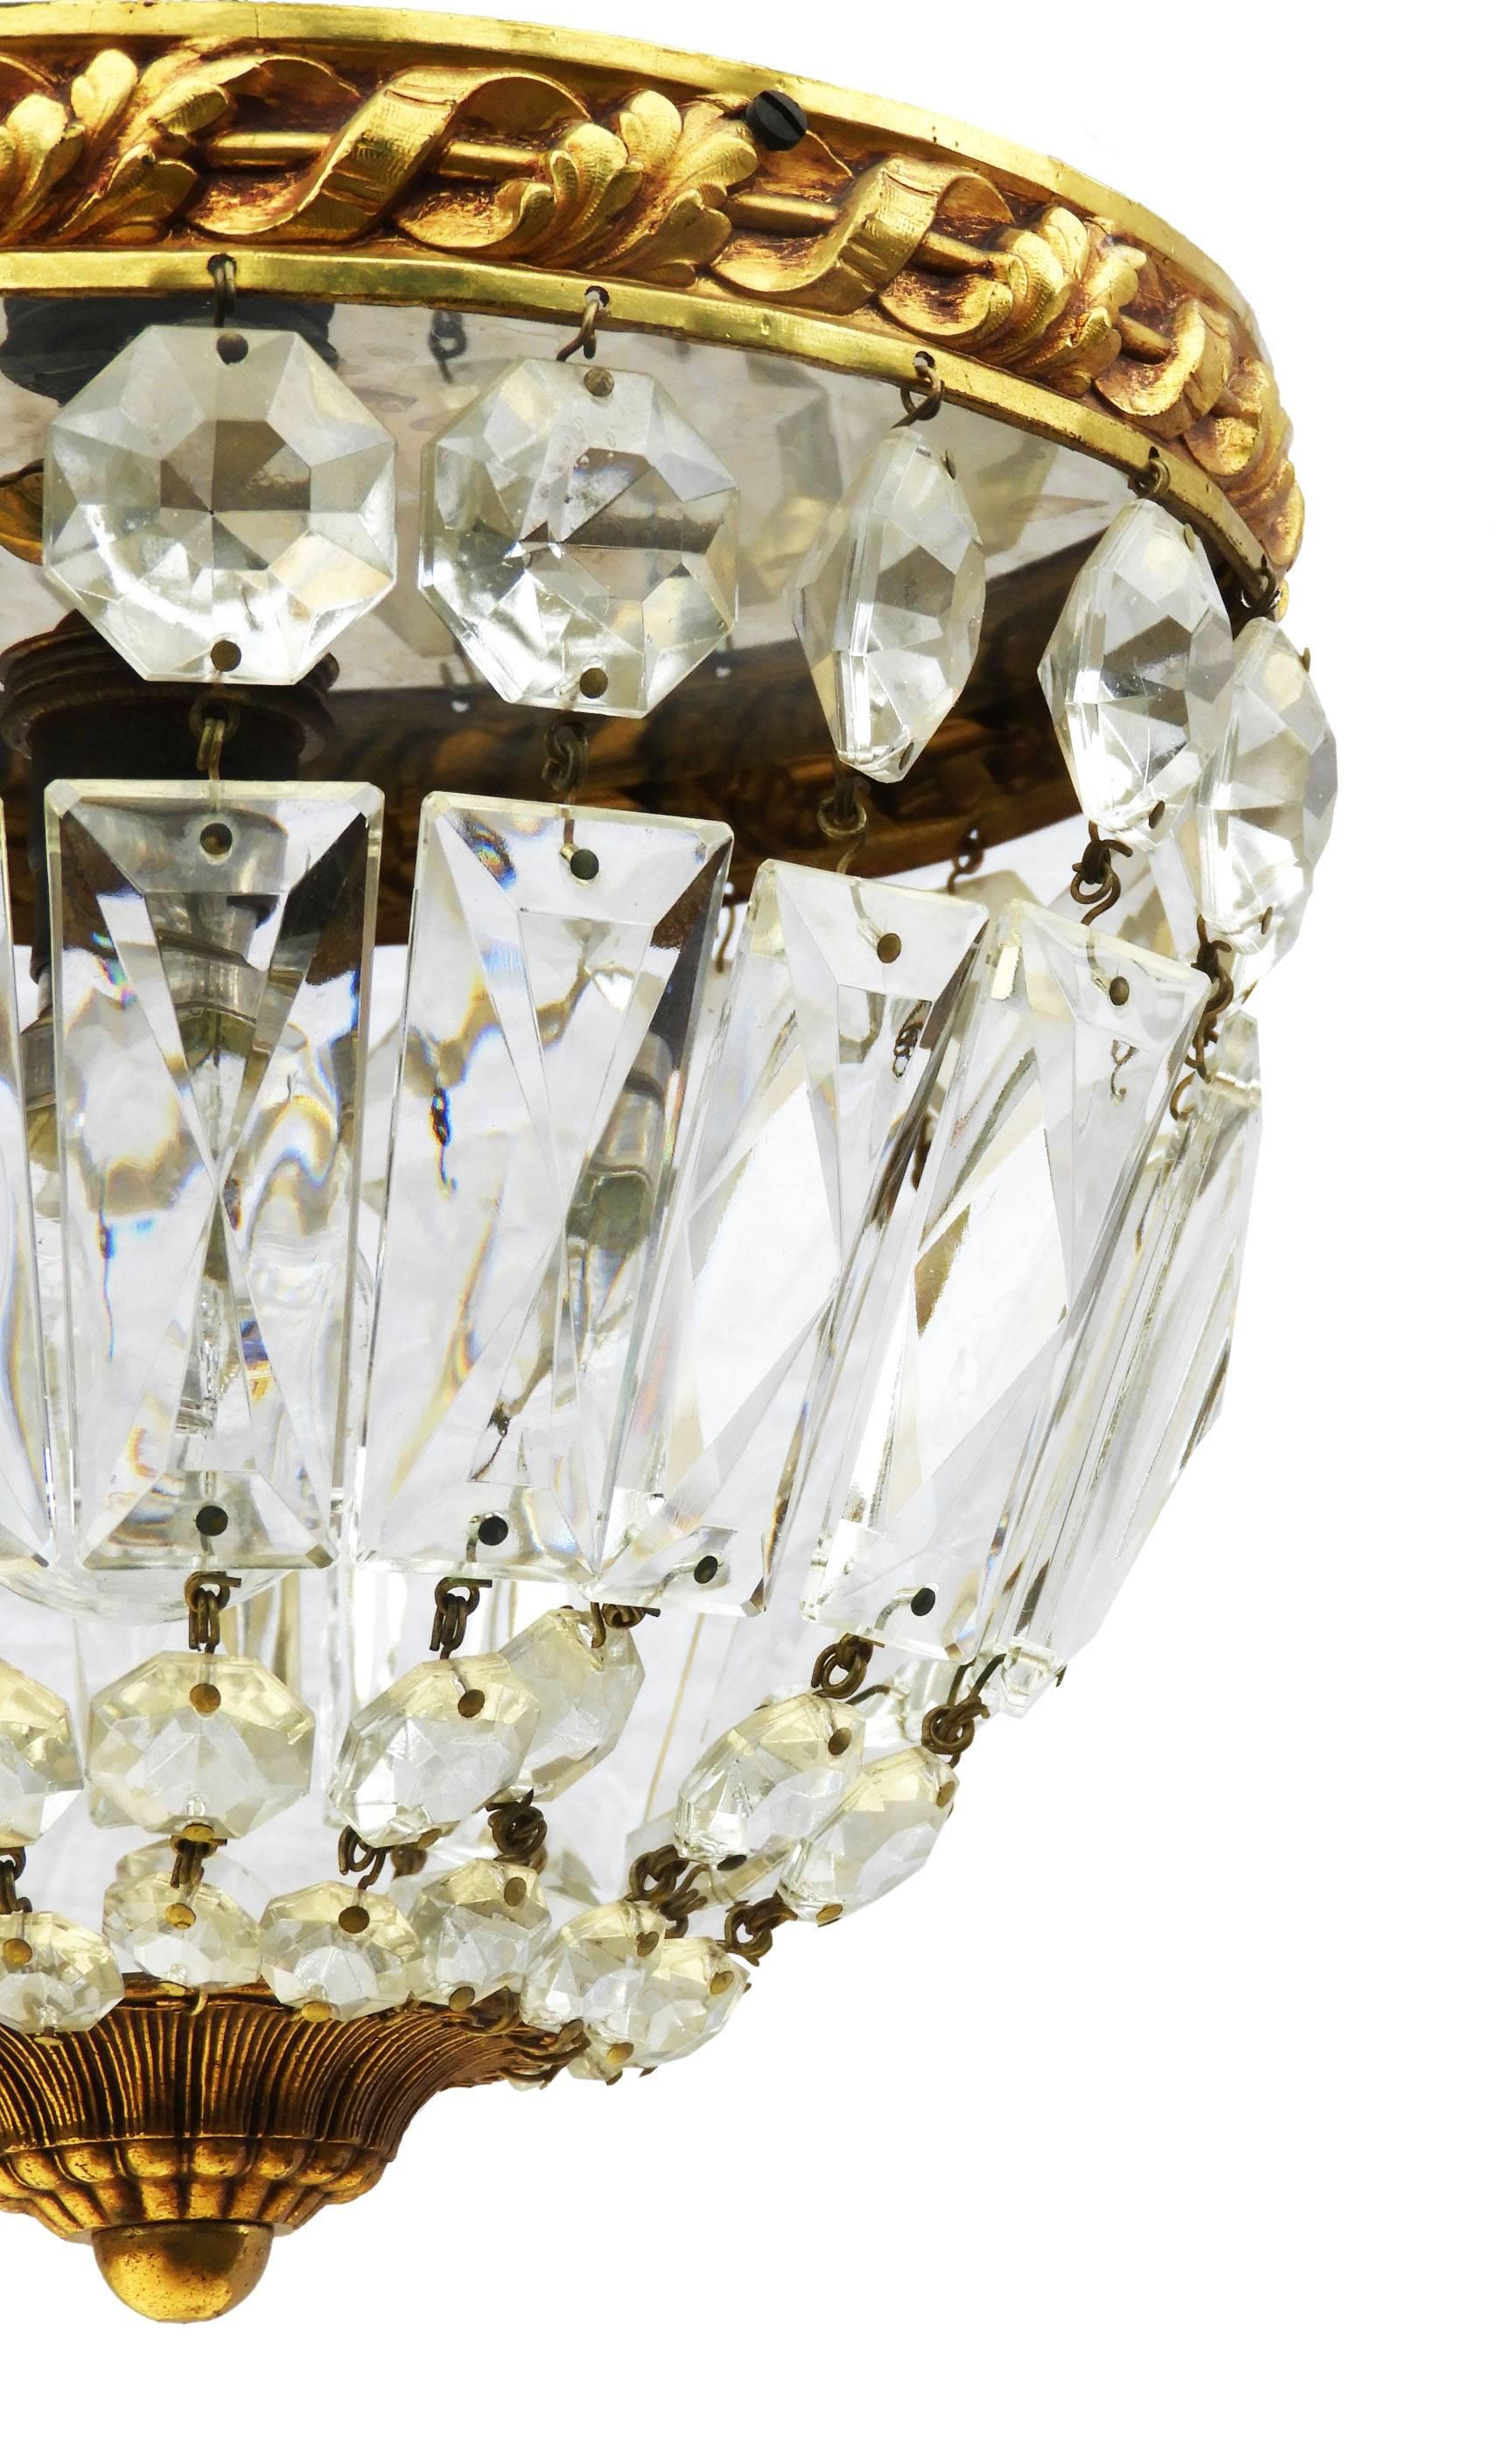 Hollywood Regency French Crystal Flush Mount Ceiling Light or Pendant, Early 20th Century Louis 